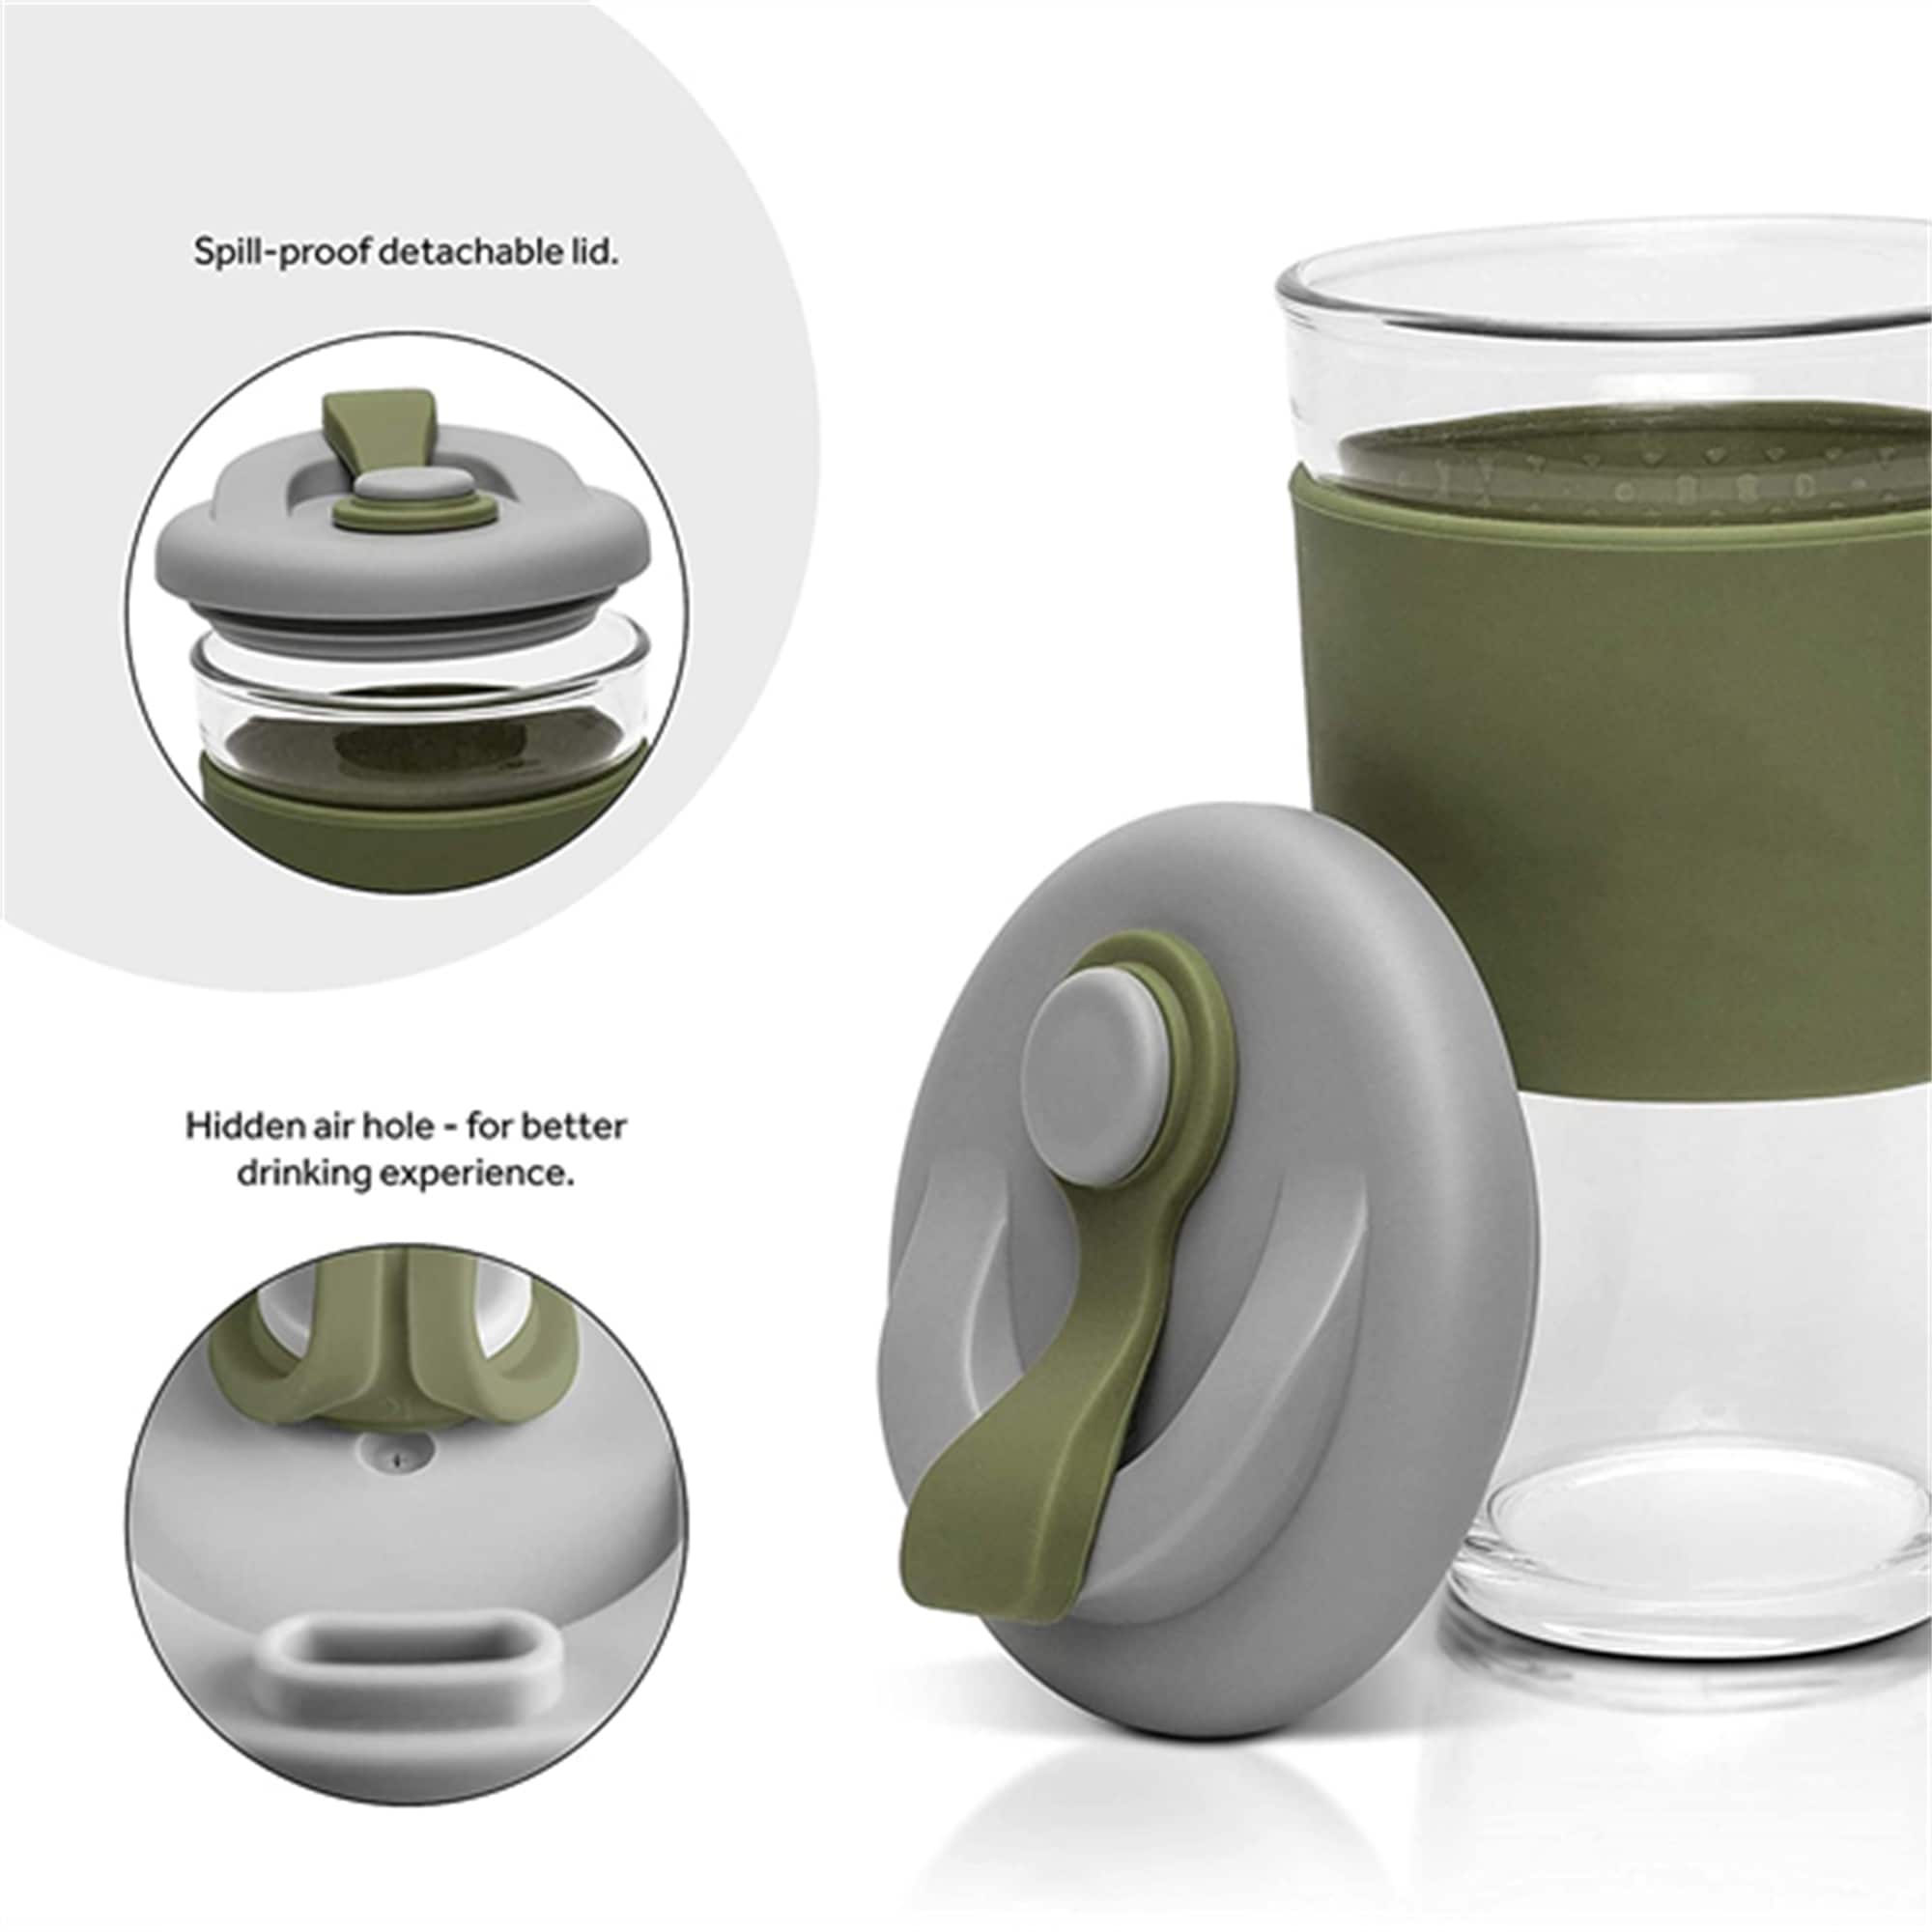 https://ak1.ostkcdn.com/images/products/is/images/direct/6303f3fe63b16a4b845316a98b2e52ec36e6cb0e/The-Reusable-Glass-Coffee-Cup%2C-ToGo-Travel-Coffee-Mug-with-Lid-and-Silicone-Sleeve%2C-Dishwasher-and-Microwave-Safe.jpg